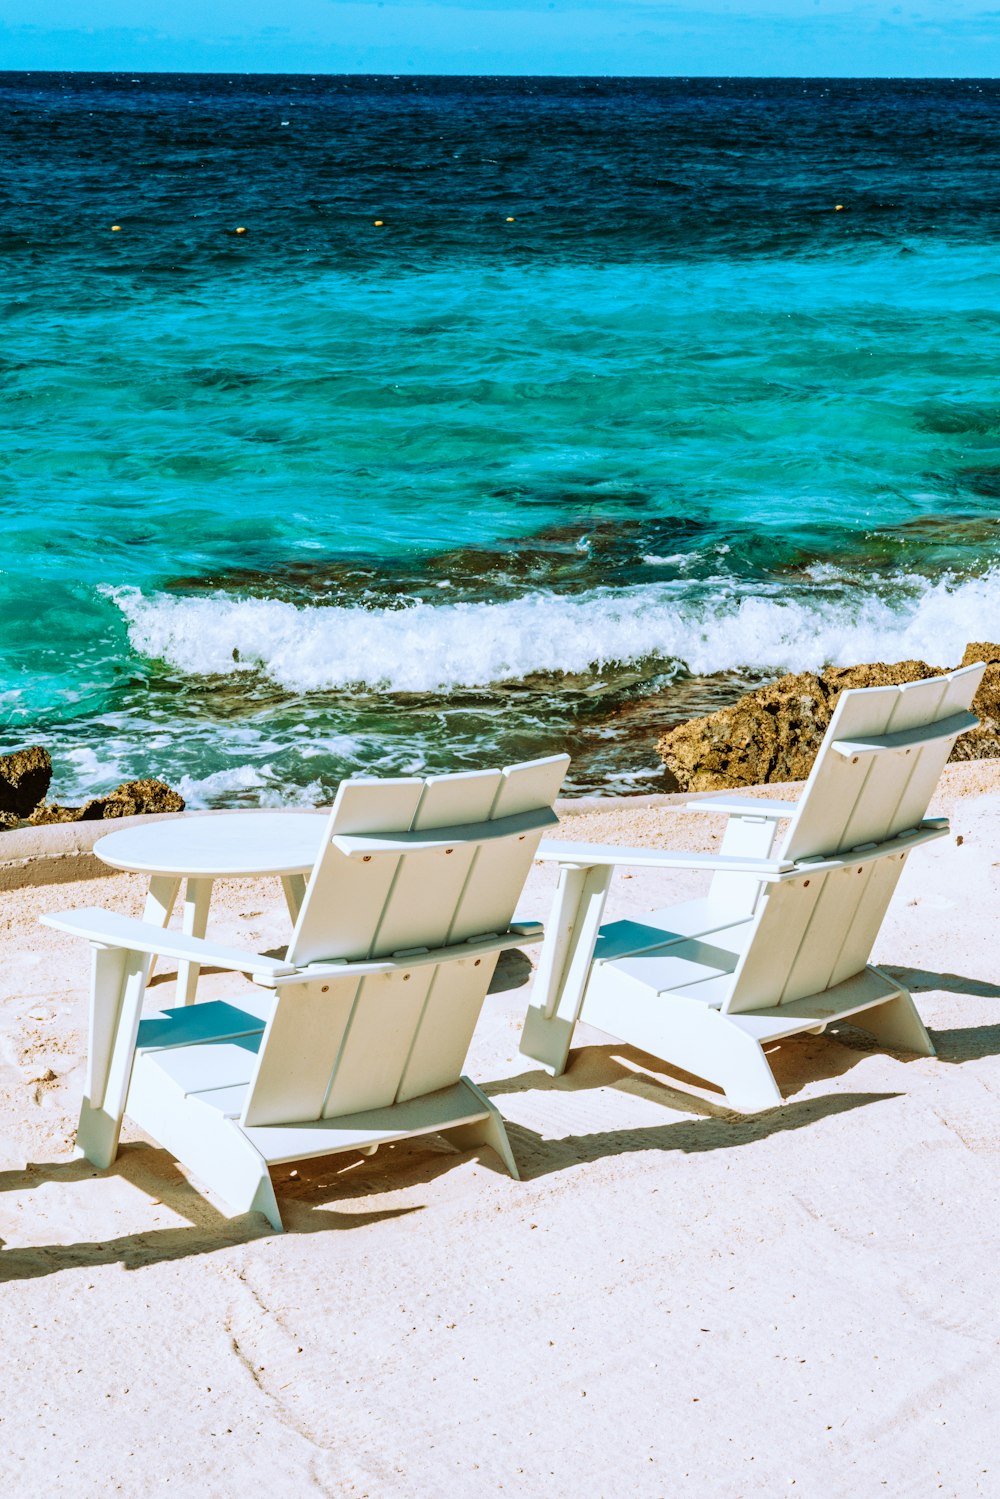 white plastic armchairs on beach shore during daytime